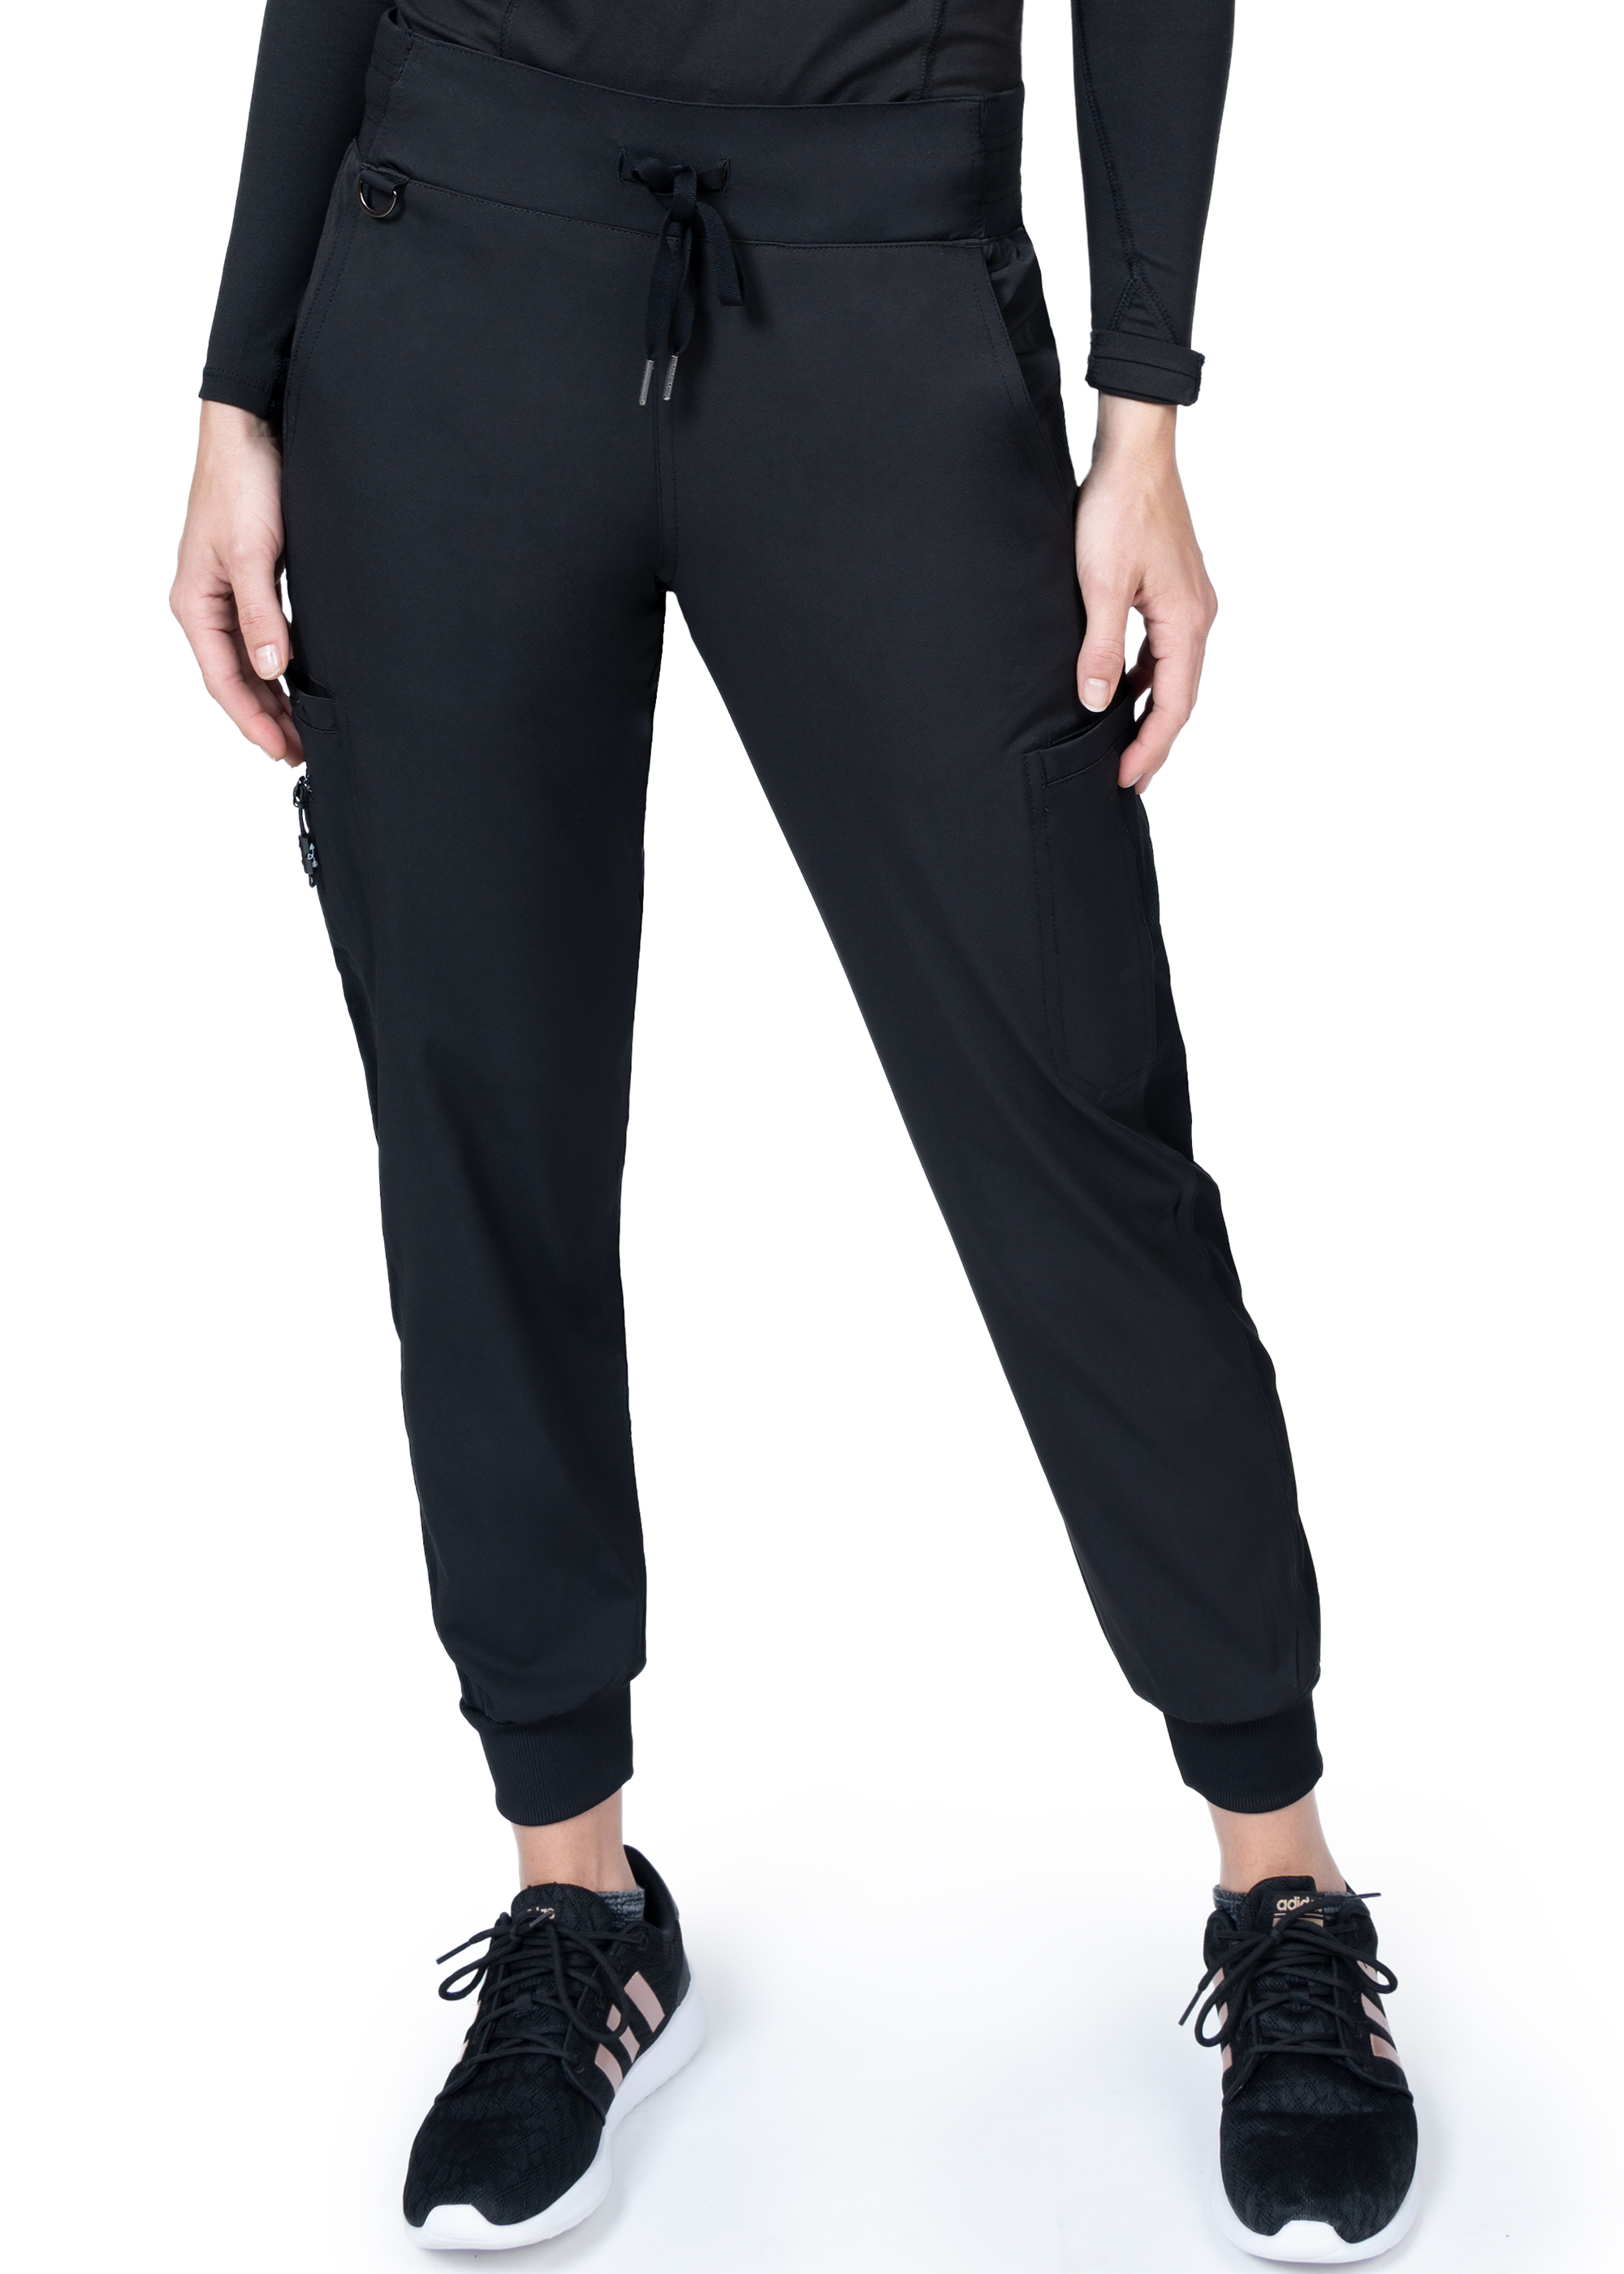 Athletic Works Womens Plus-size Athleisure Commuter Pants Slate